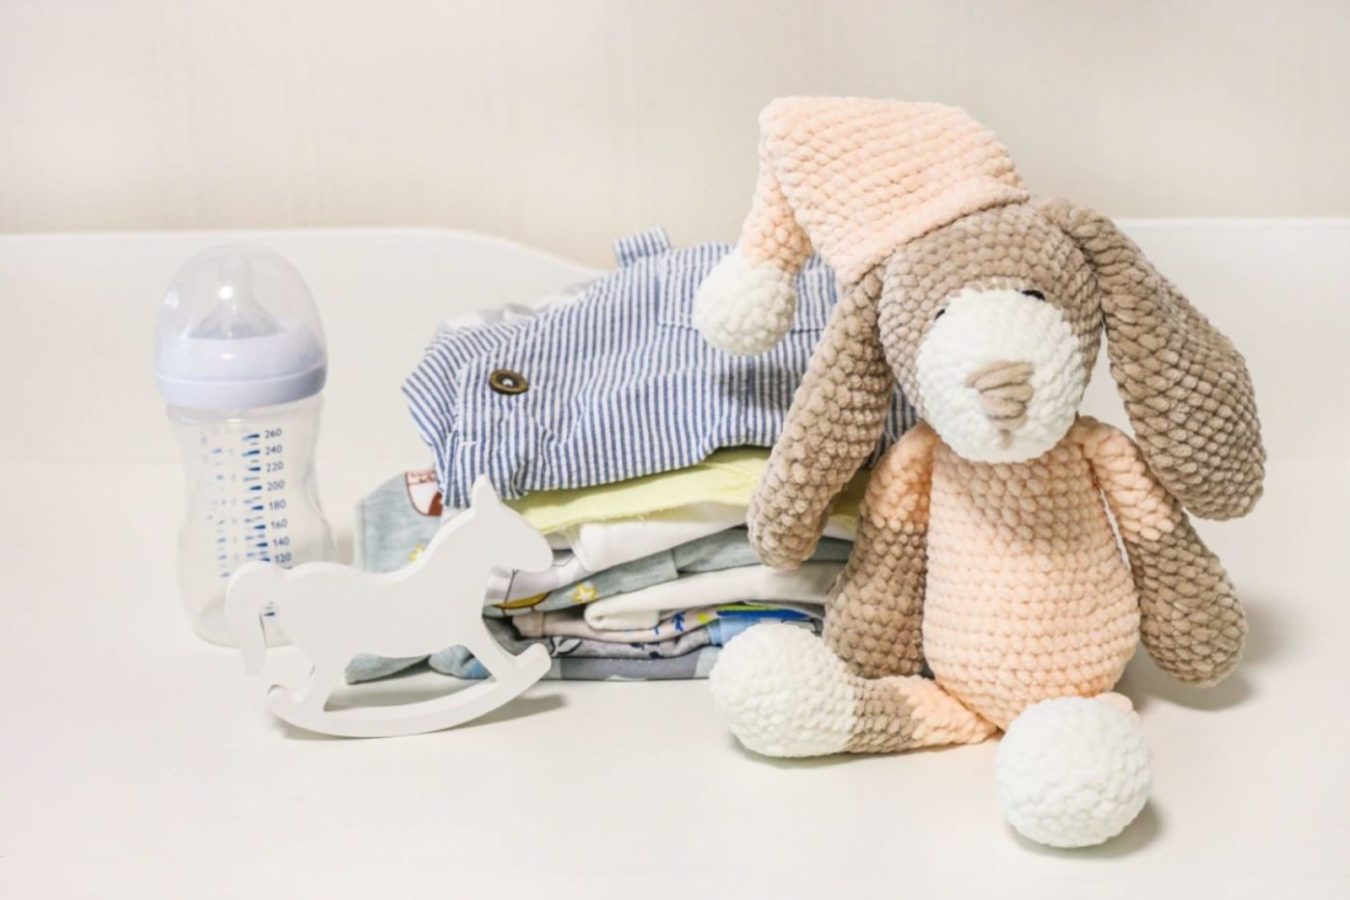 A stack of baby clothes with a stuffed animal, toy horse and baby bottle.